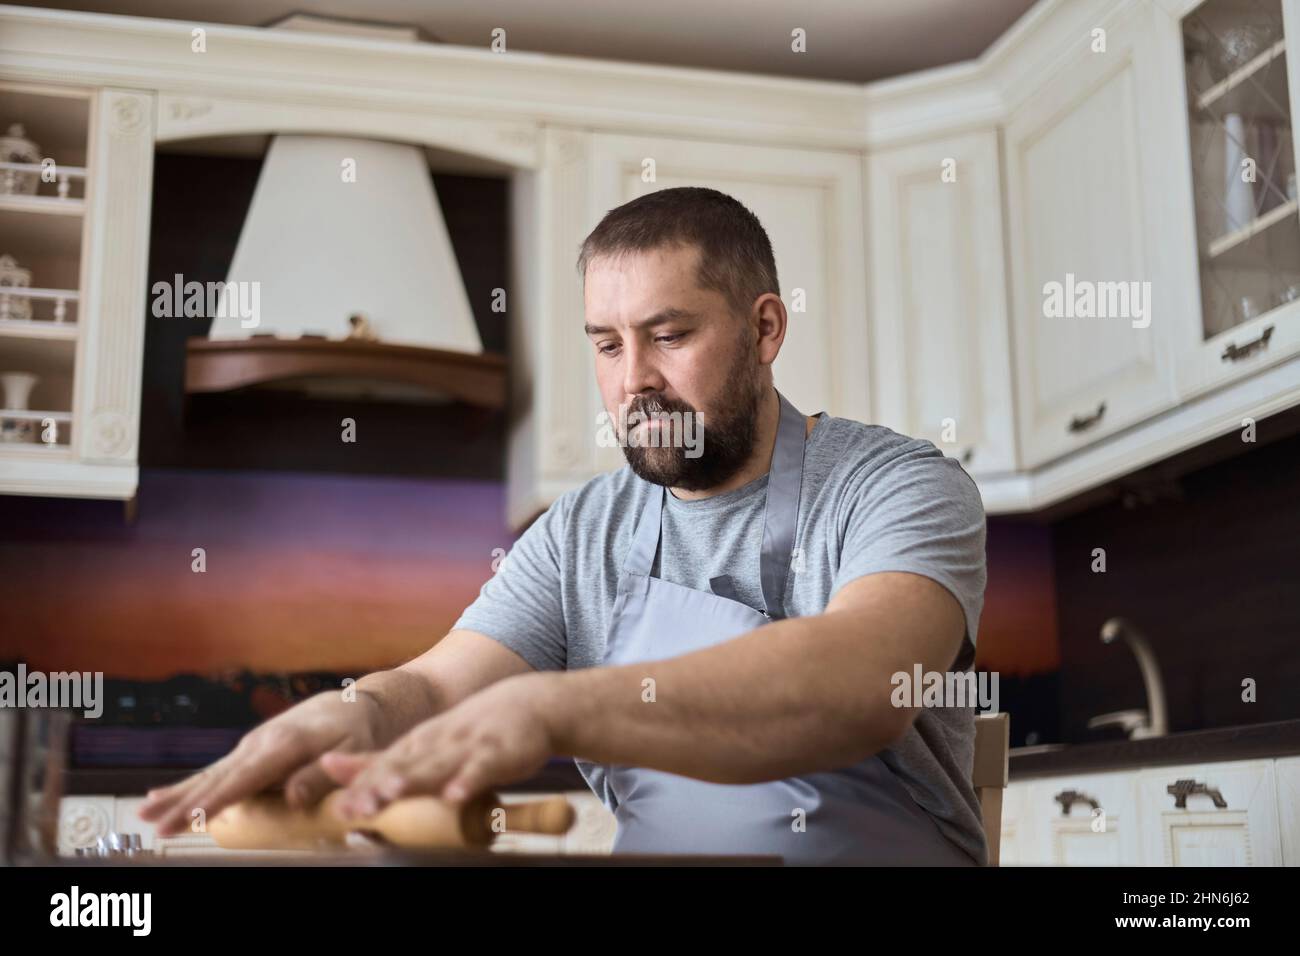 A man is rolling out dough in the kitchen Stock Photo